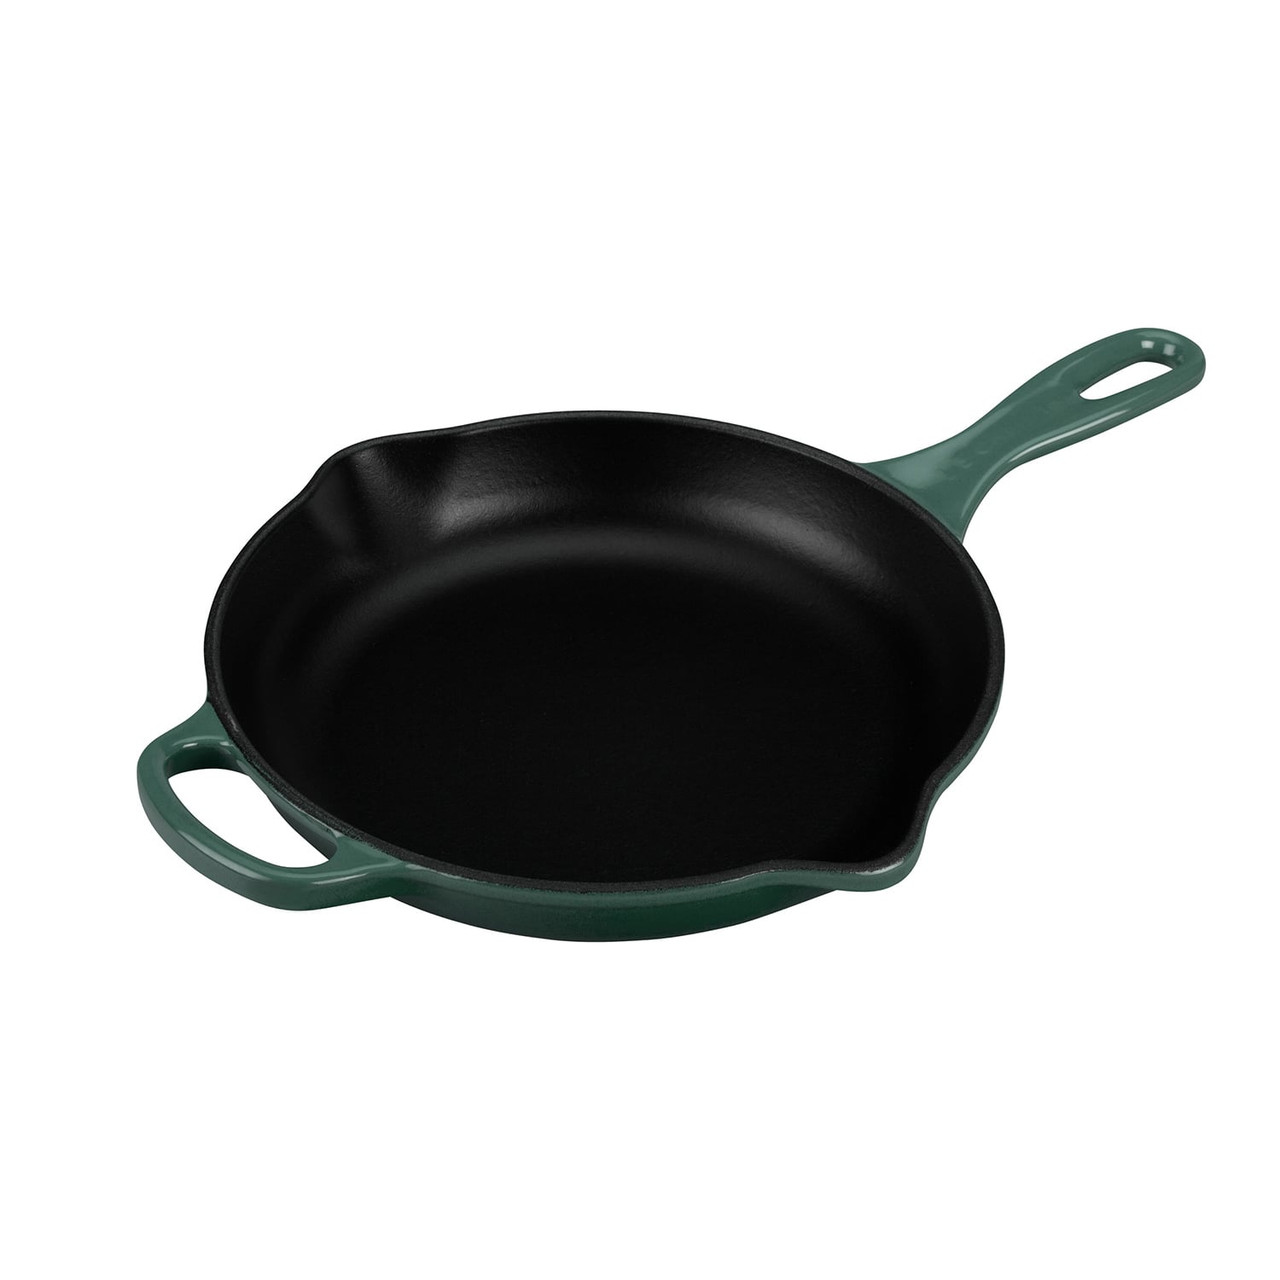 https://cdn11.bigcommerce.com/s-hccytny0od/images/stencil/1280x1280/products/3958/14447/le-creuset-signature-skillet-artichaut-9in__90396.1616937458.jpg?c=2?imbypass=on